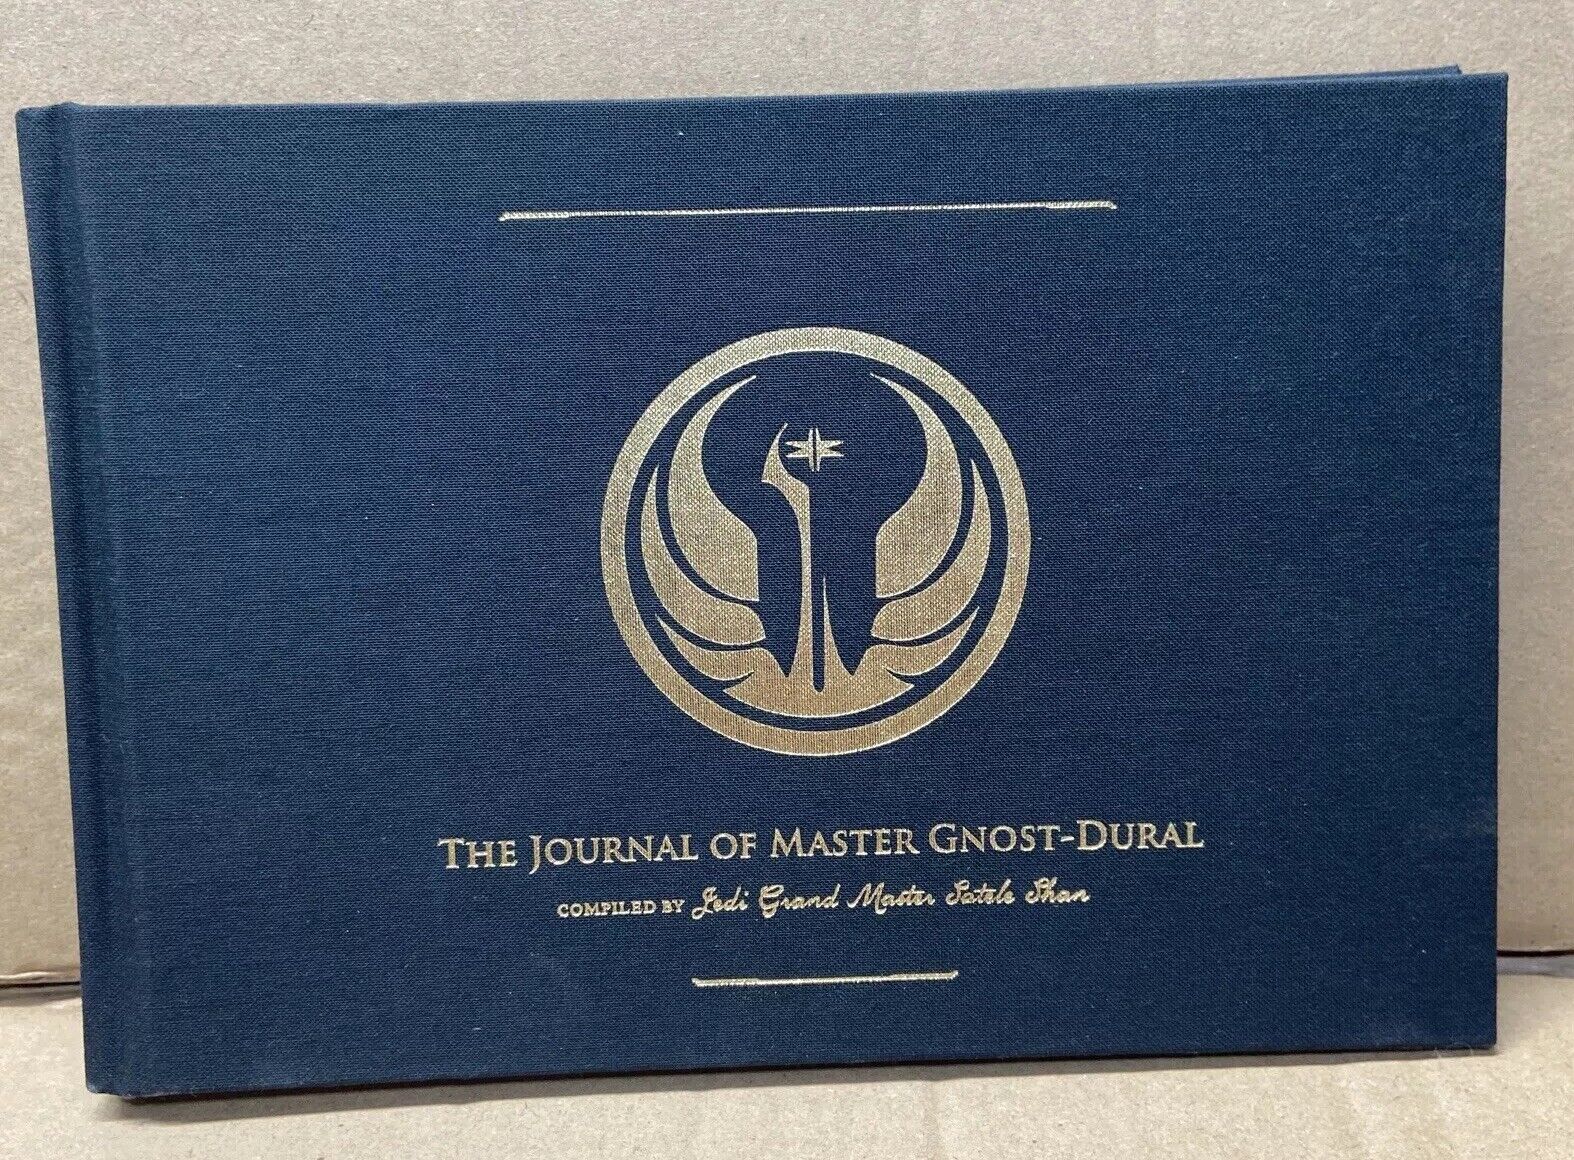 STAR WARS The Journal Of Master Gnost-Dural 2011 Hardcover Book Includes Maps